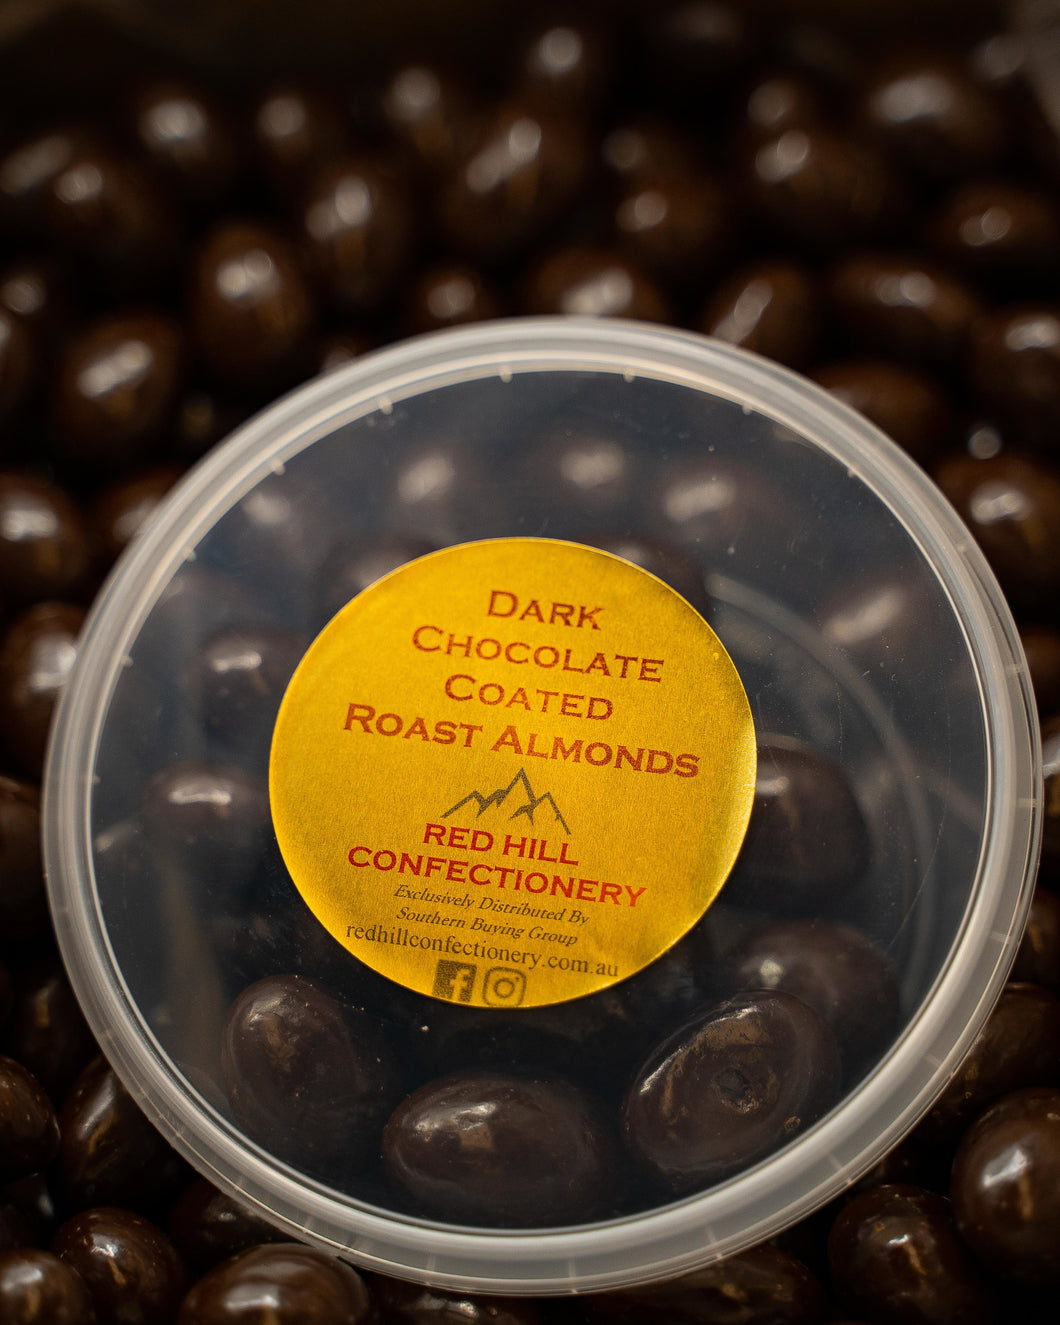 Red Hill Confectionery - Dark Chocolate Coated Almonds 150g Tub